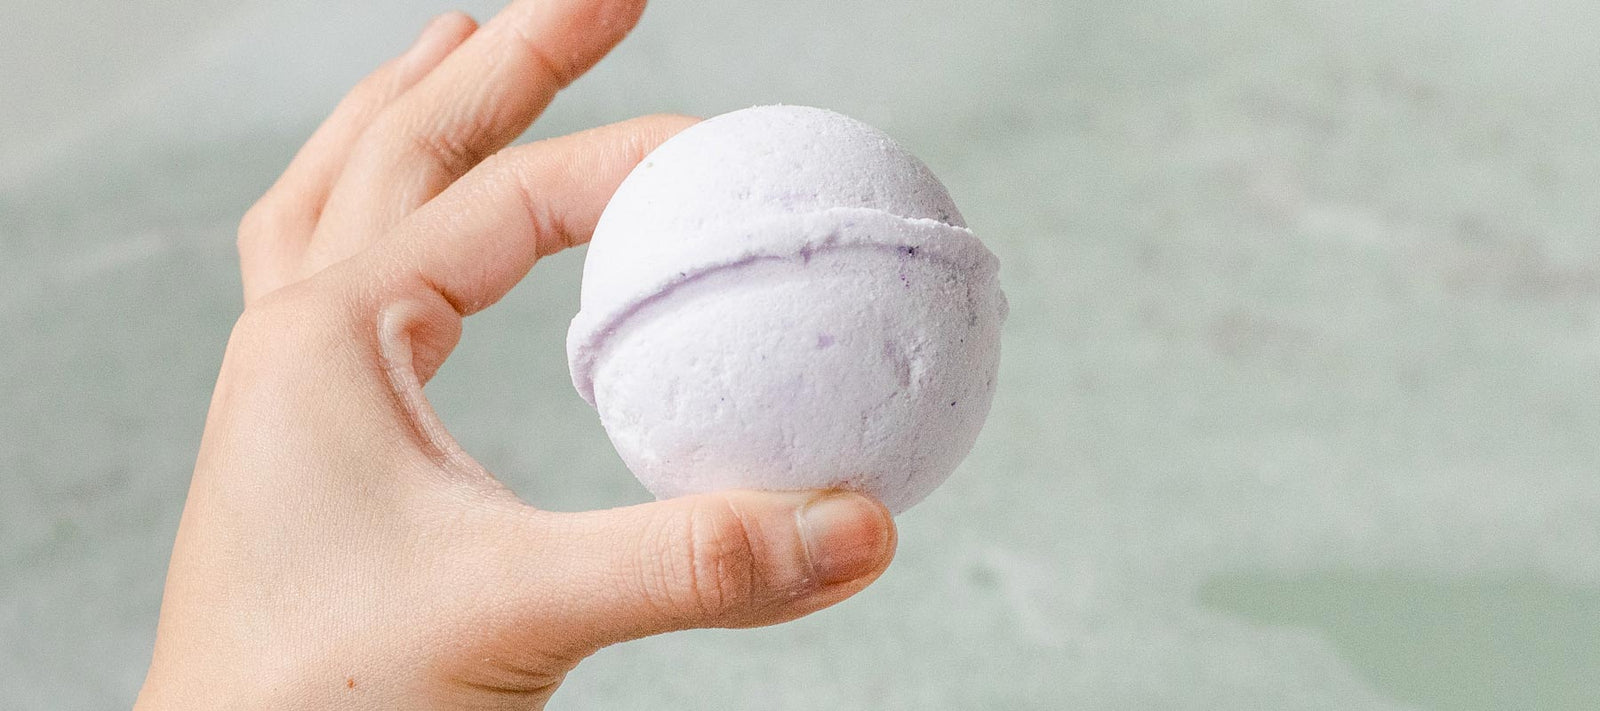 Bath Bomb 101: 10 Frequently Asked Questions